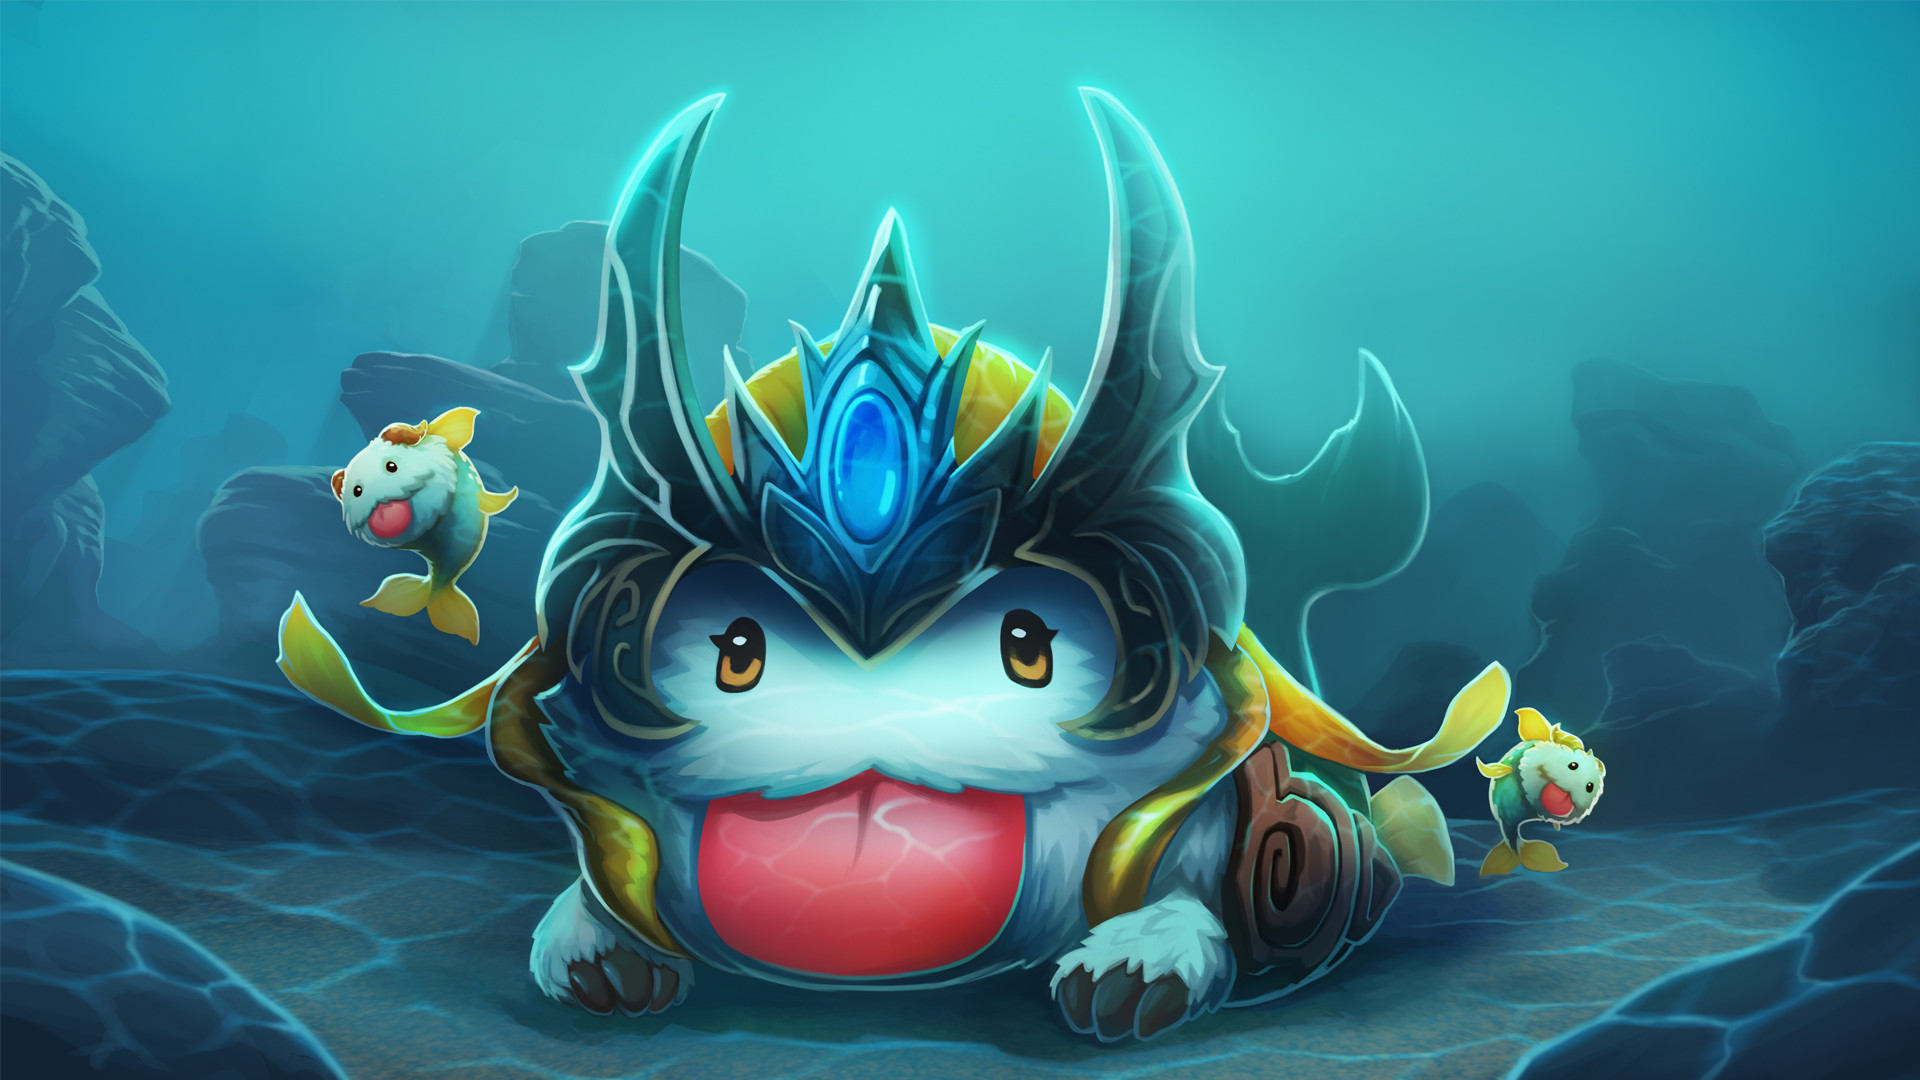 1920x1080 League of Legends images Poro Nami HD wallpaper and background photos